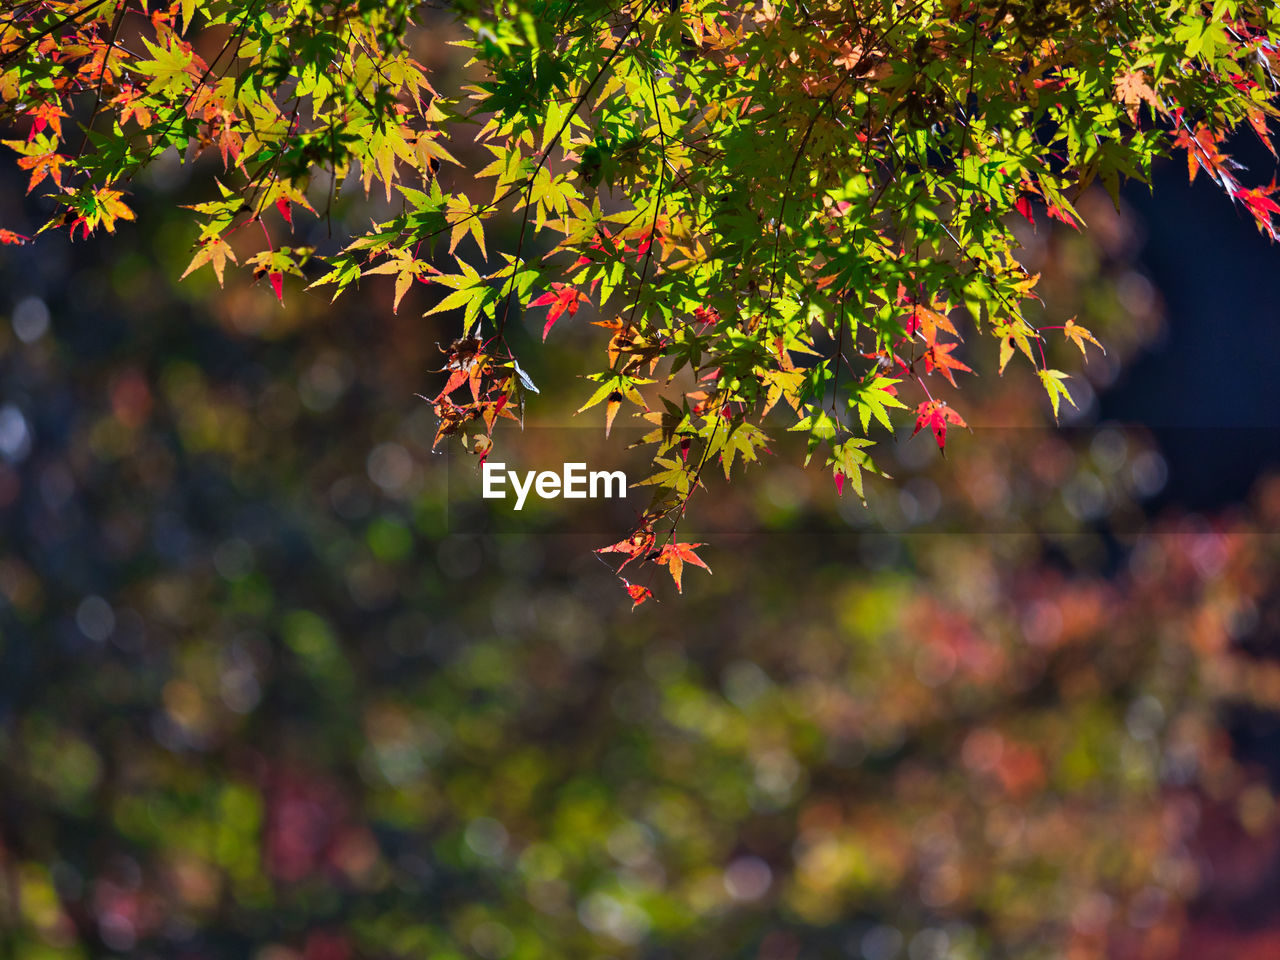 CLOSE-UP OF MAPLE LEAVES AGAINST BLURRED BACKGROUND